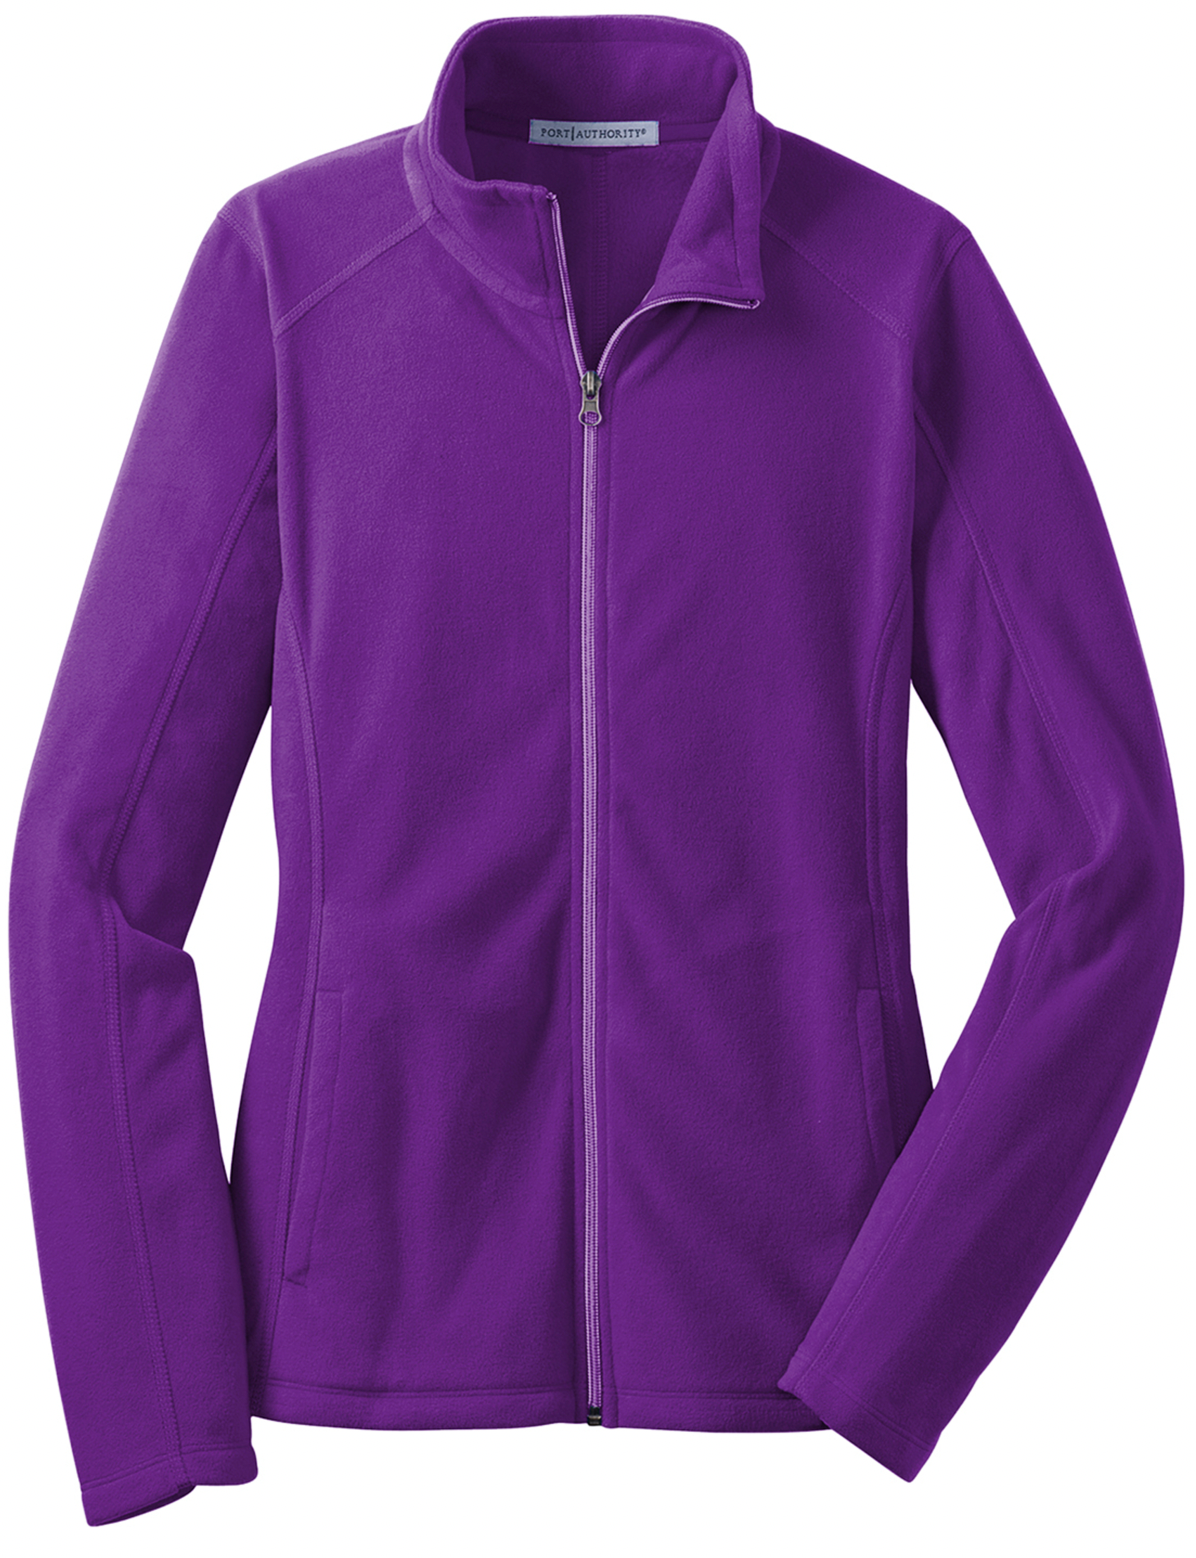 Mary Hill - Integrated Services Ladies Microfleece Jacket